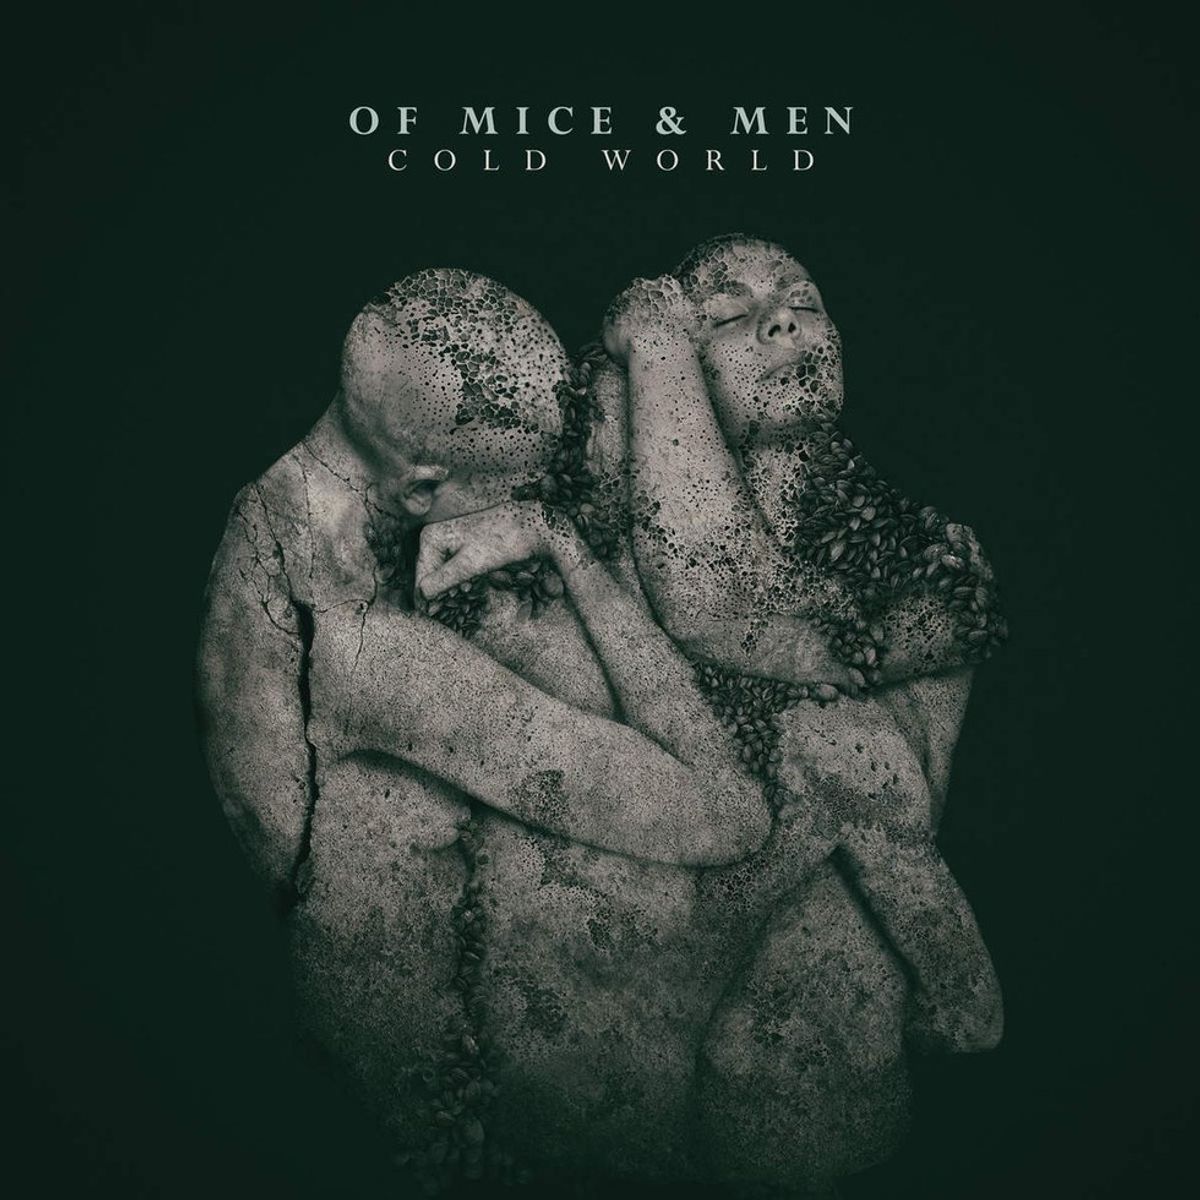 Of Mice & Men Show Us A "Cold World"